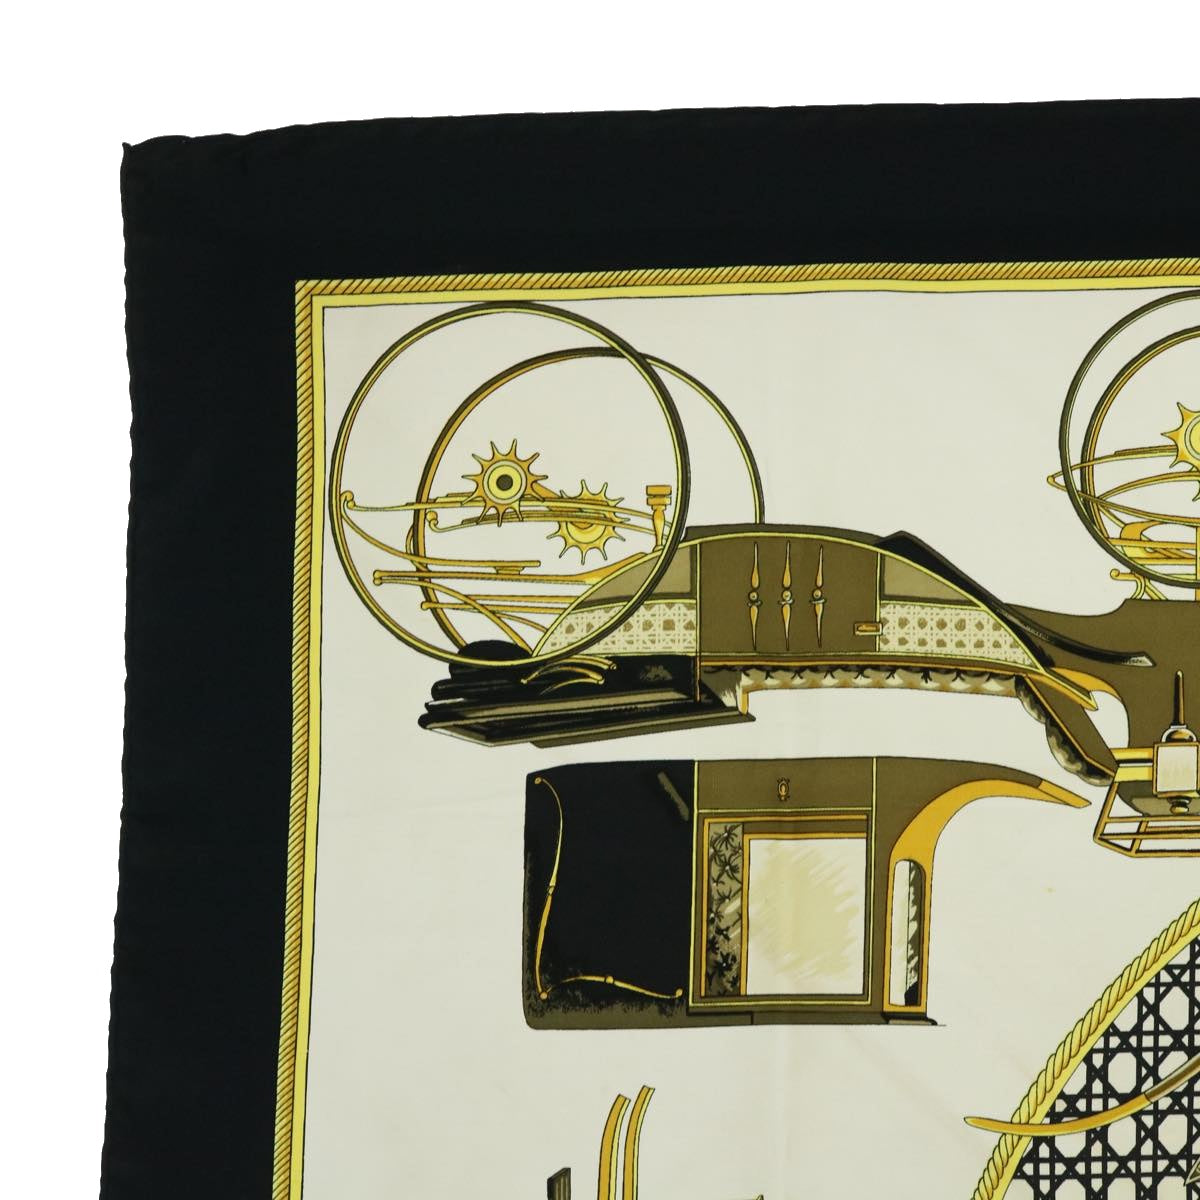 HERMES Carre 90 LES VOITURES A TRANSFORMATION Scarf Silk White Black Auth 51381